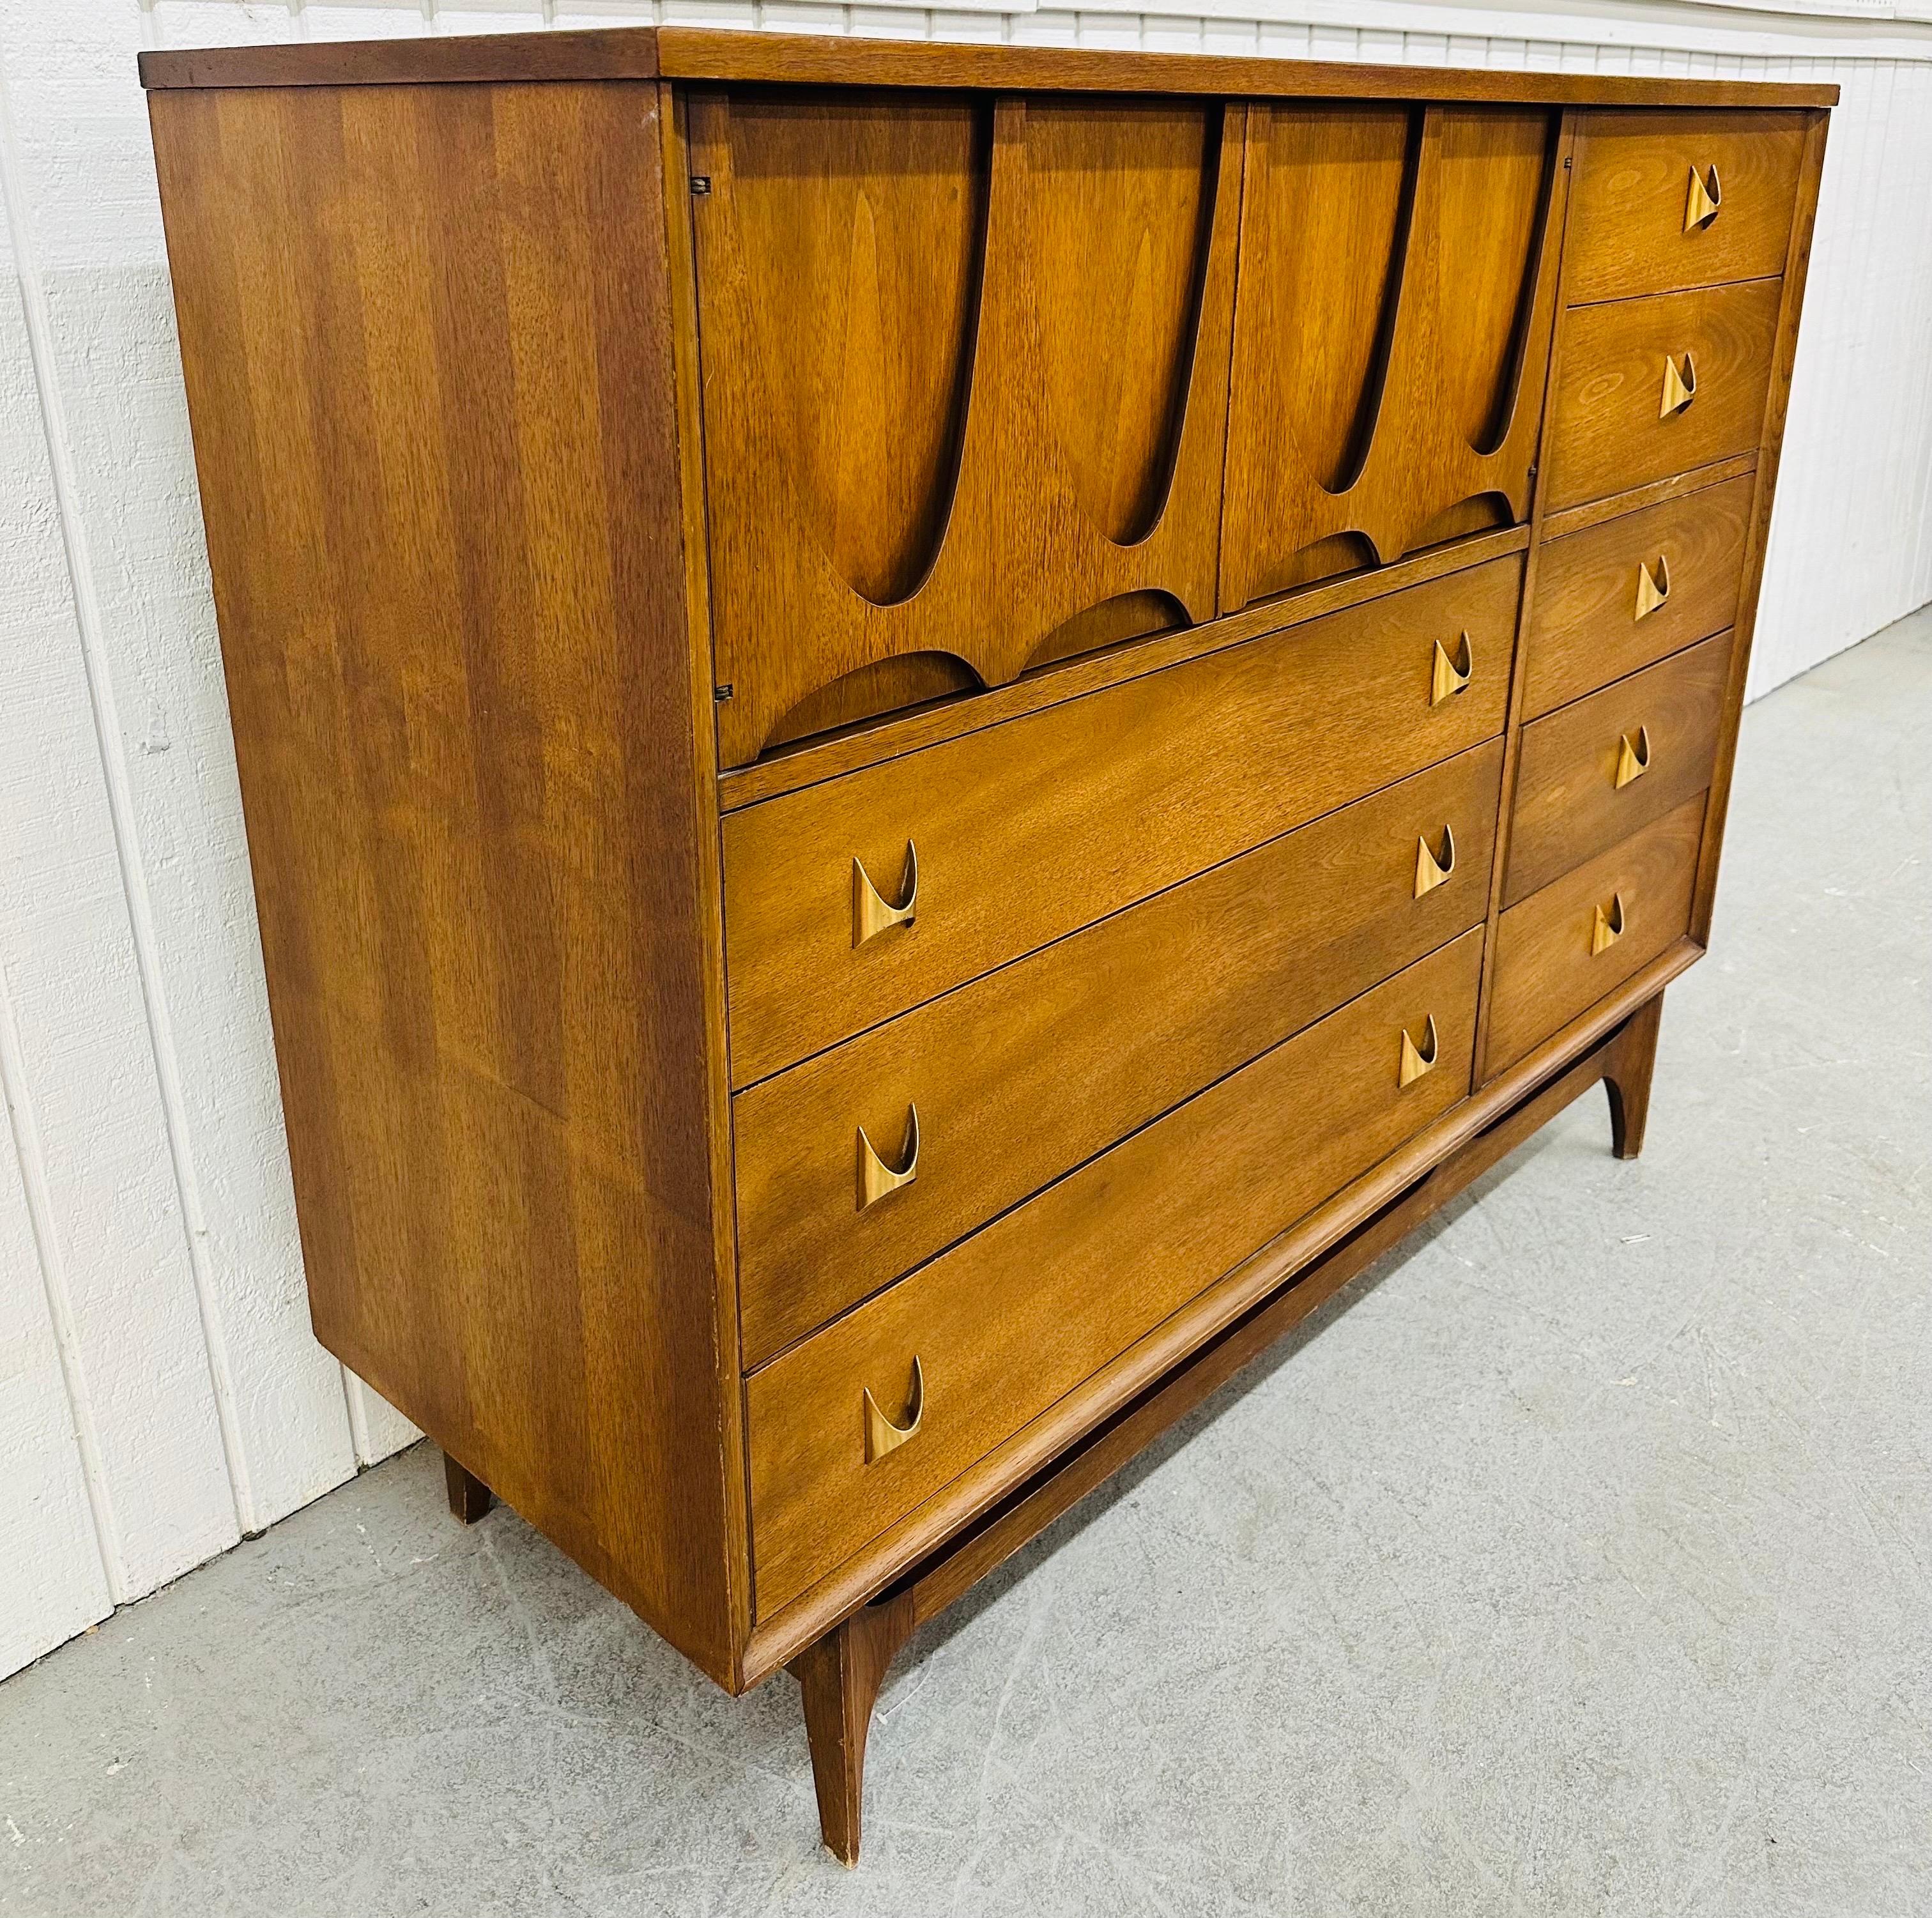 This listing is for a Mid-Century Modern Broyhill Brasilia Walnut Magna Chest. Featuring a straight line design, two doors with sculpted Brasilia pulls that open up to storage space, three larger drawers underneath, five small drawers on the right